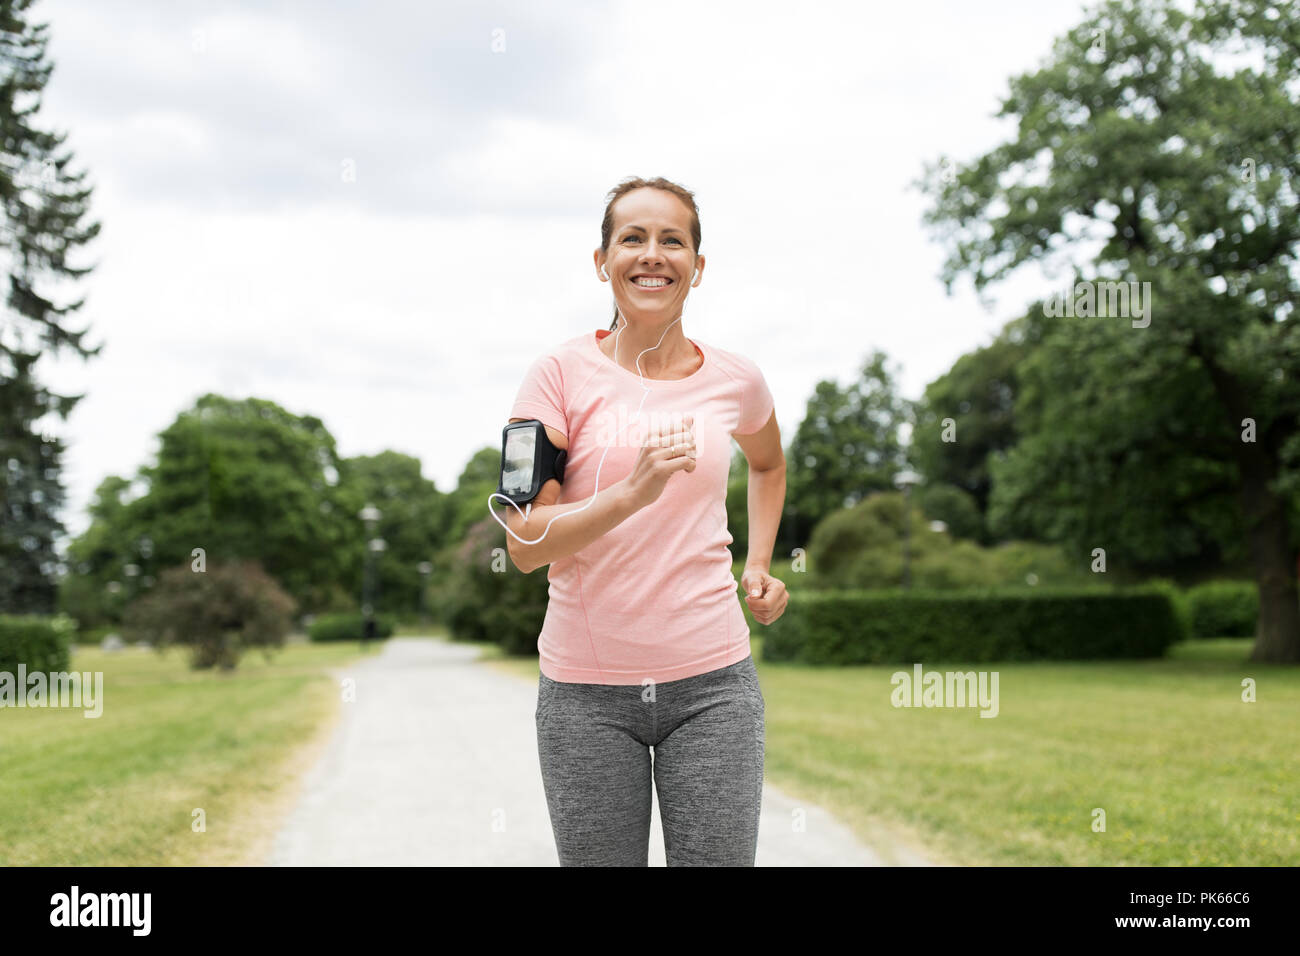 woman with earphones and armband jogging at park Stock Photo